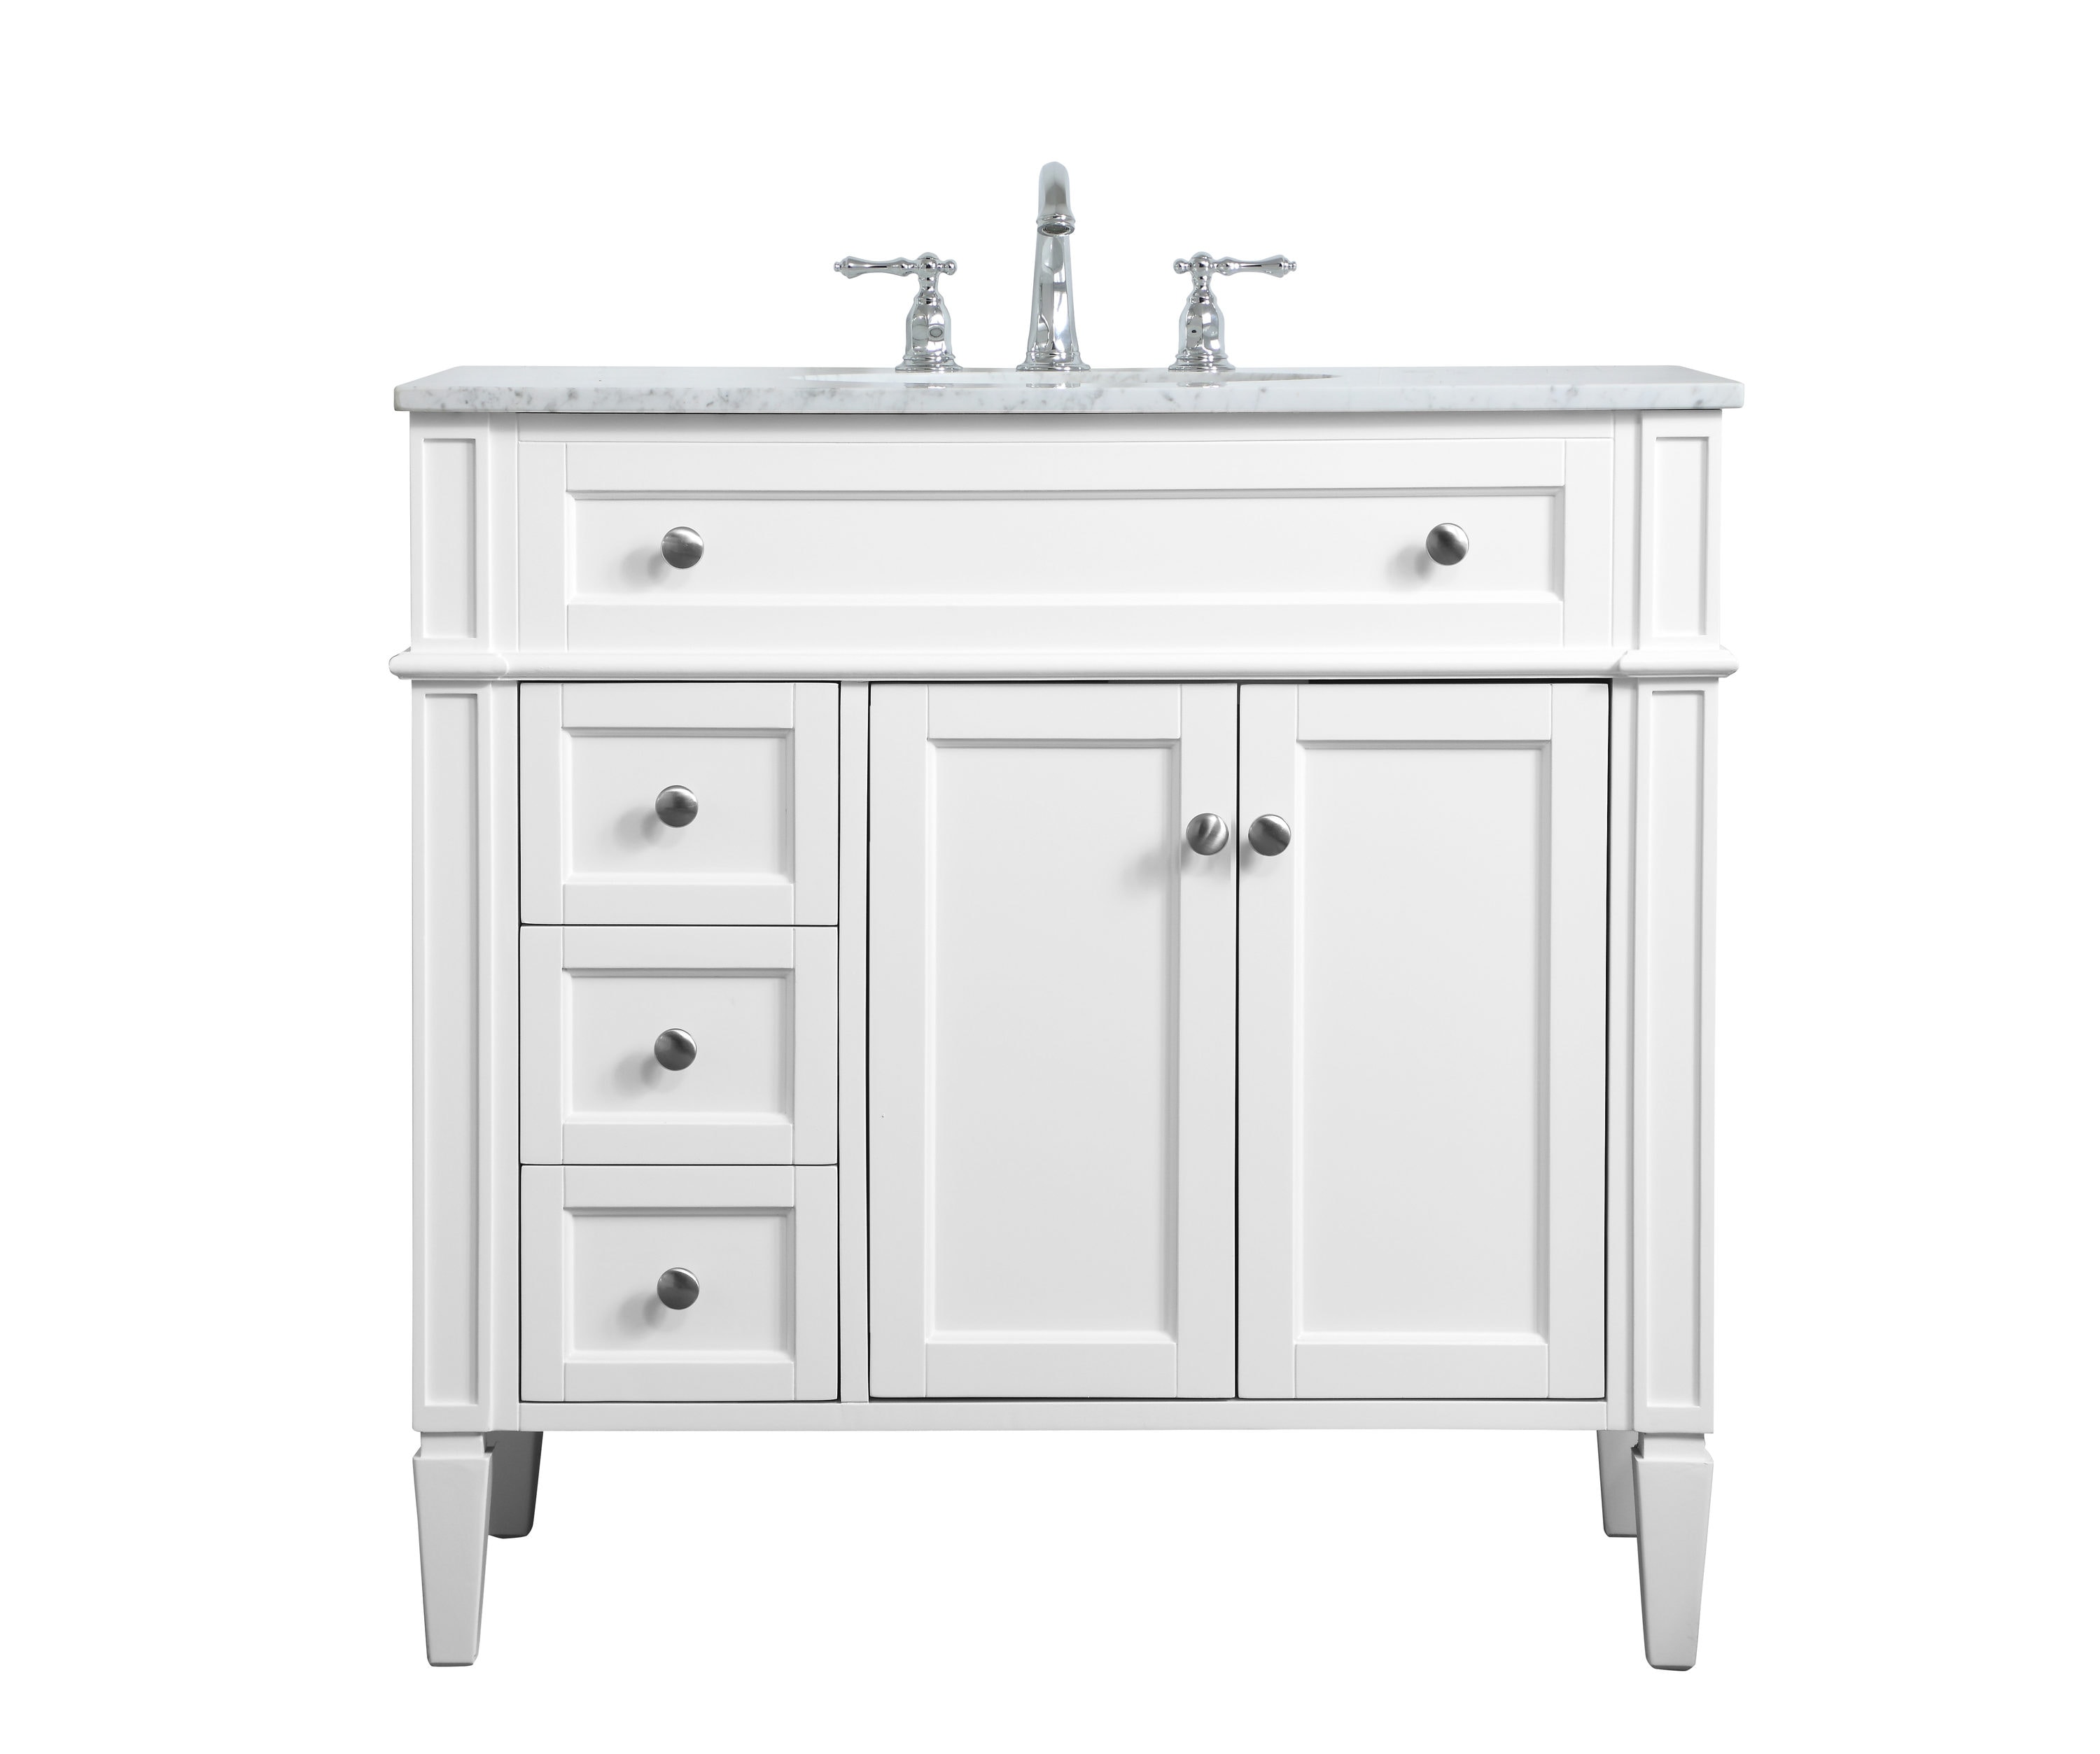 Home Furnishing 36-in White Undermount Single Sink Bathroom Vanity with Carrara White Marble Top | - Elegant Decor HF37608WH